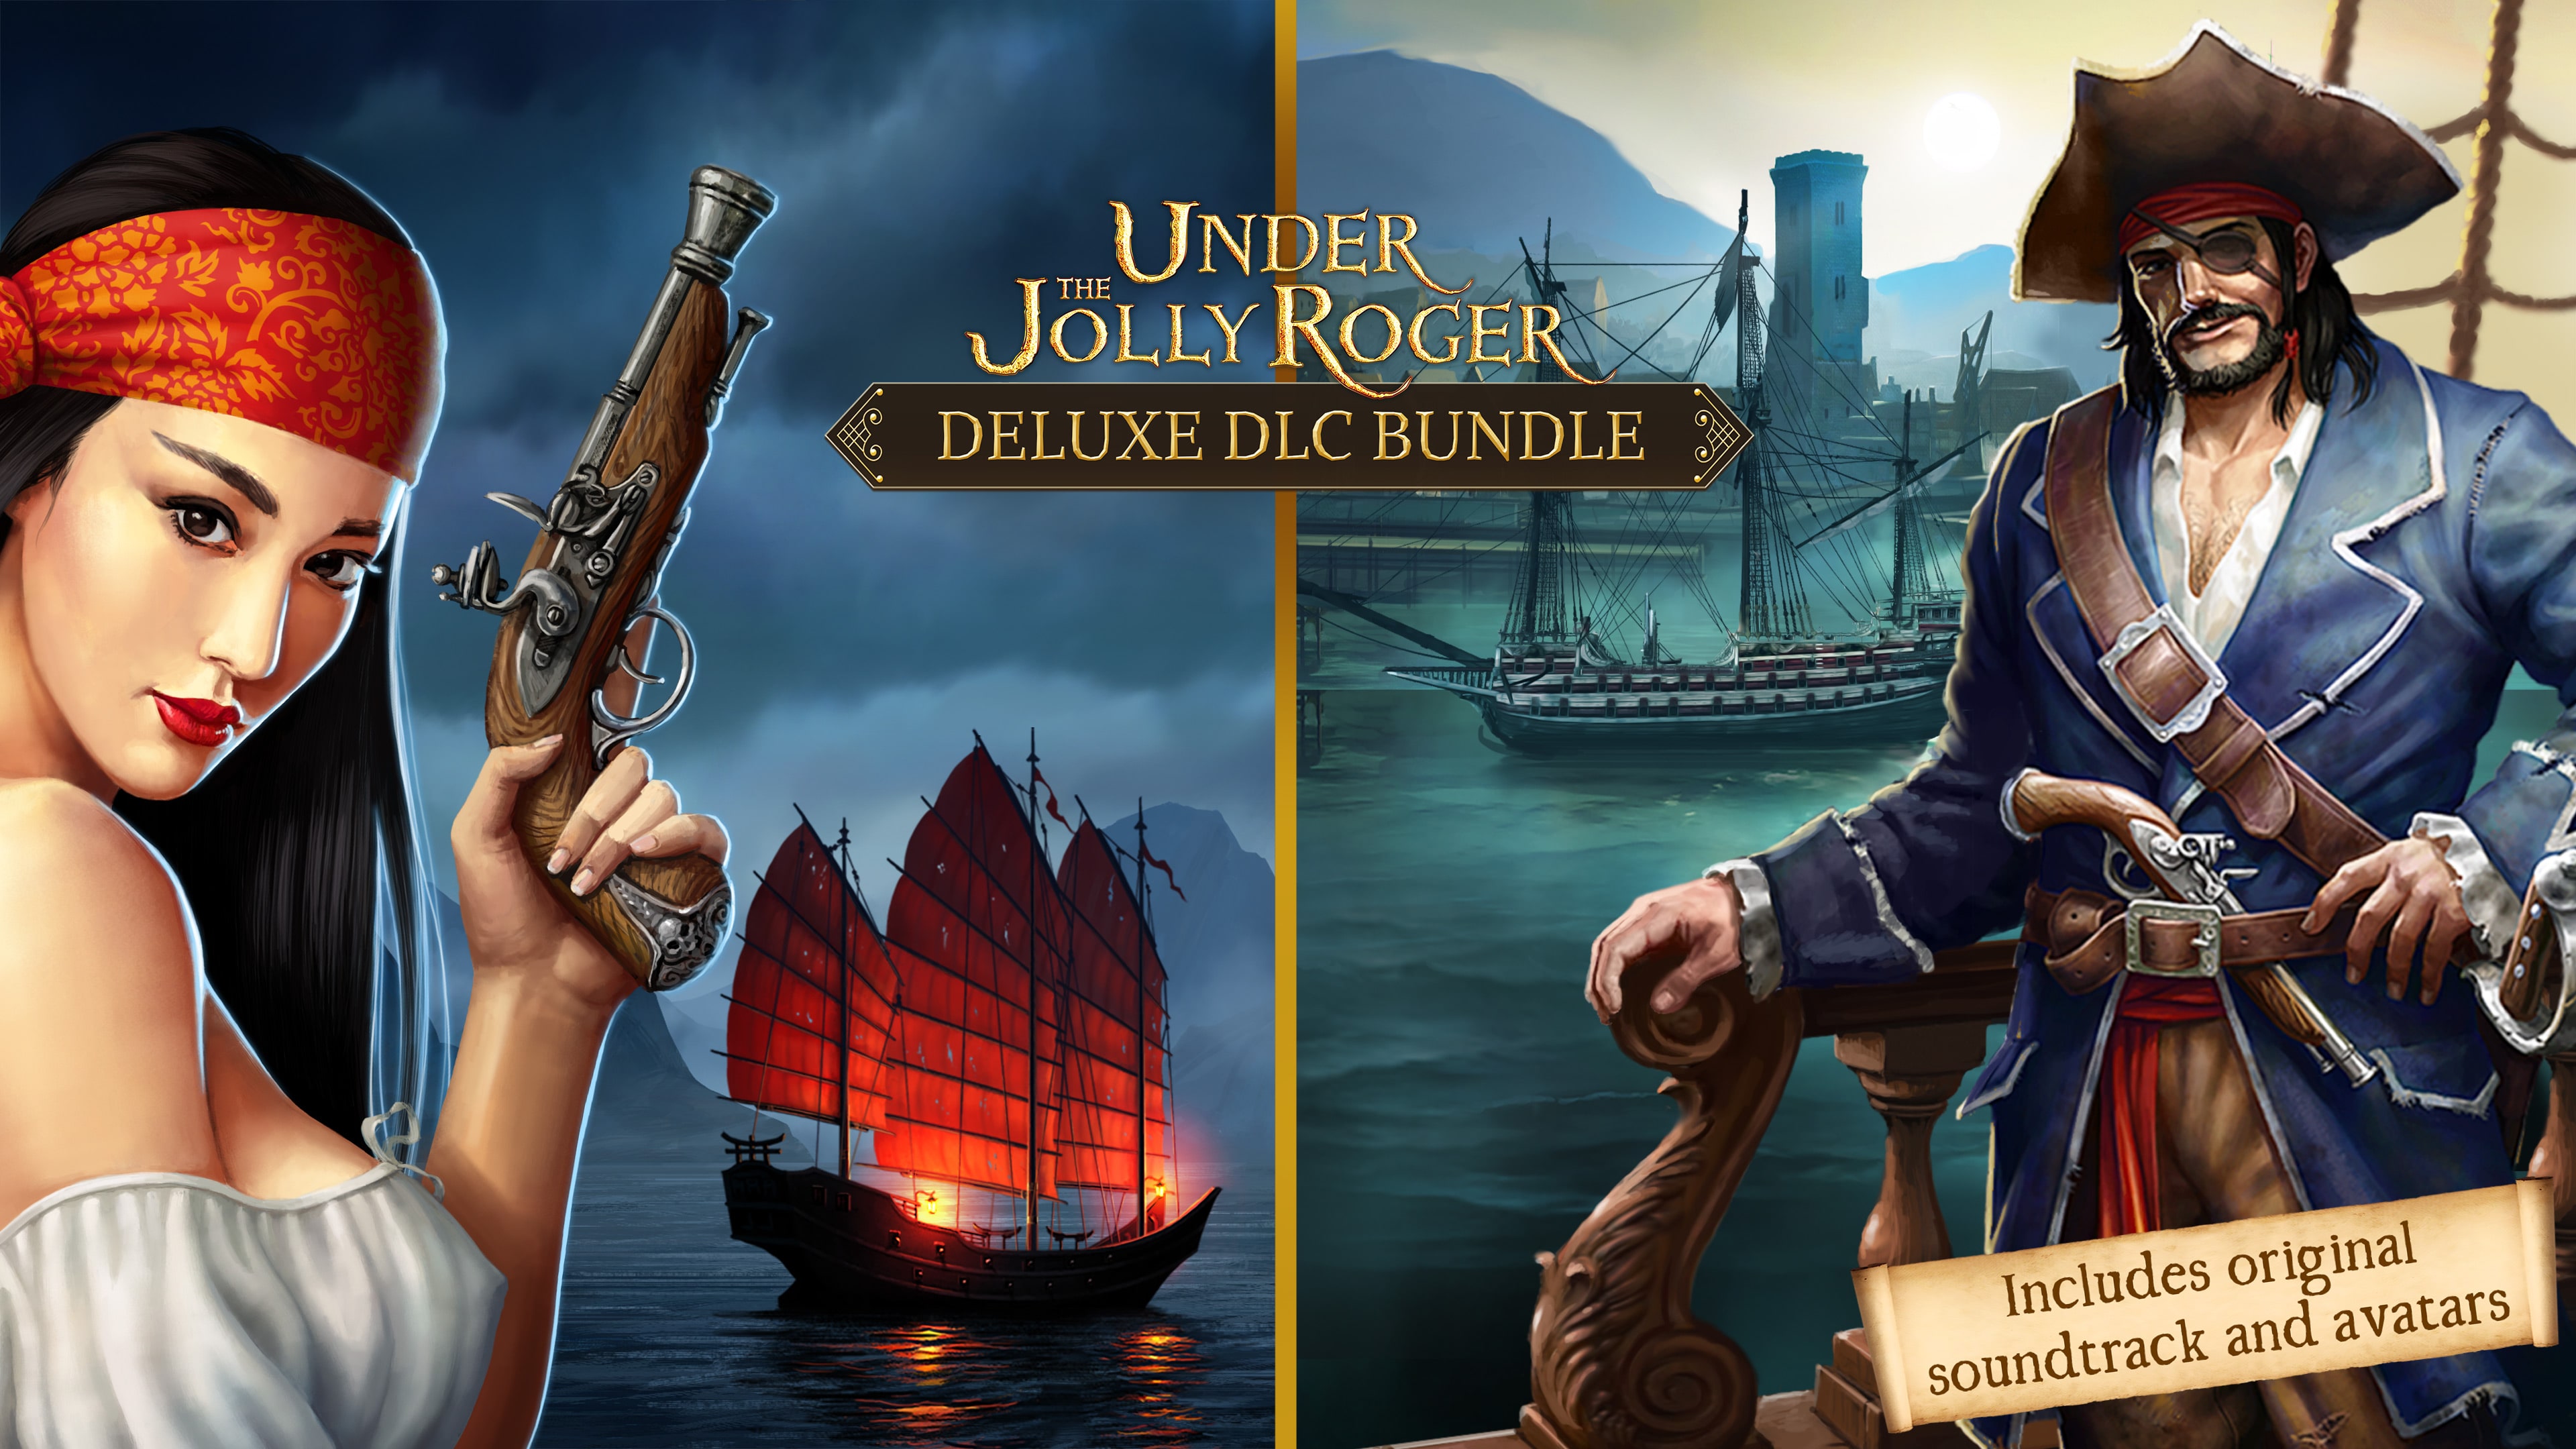 Under the Jolly Roger - Deluxe DLC Bundle